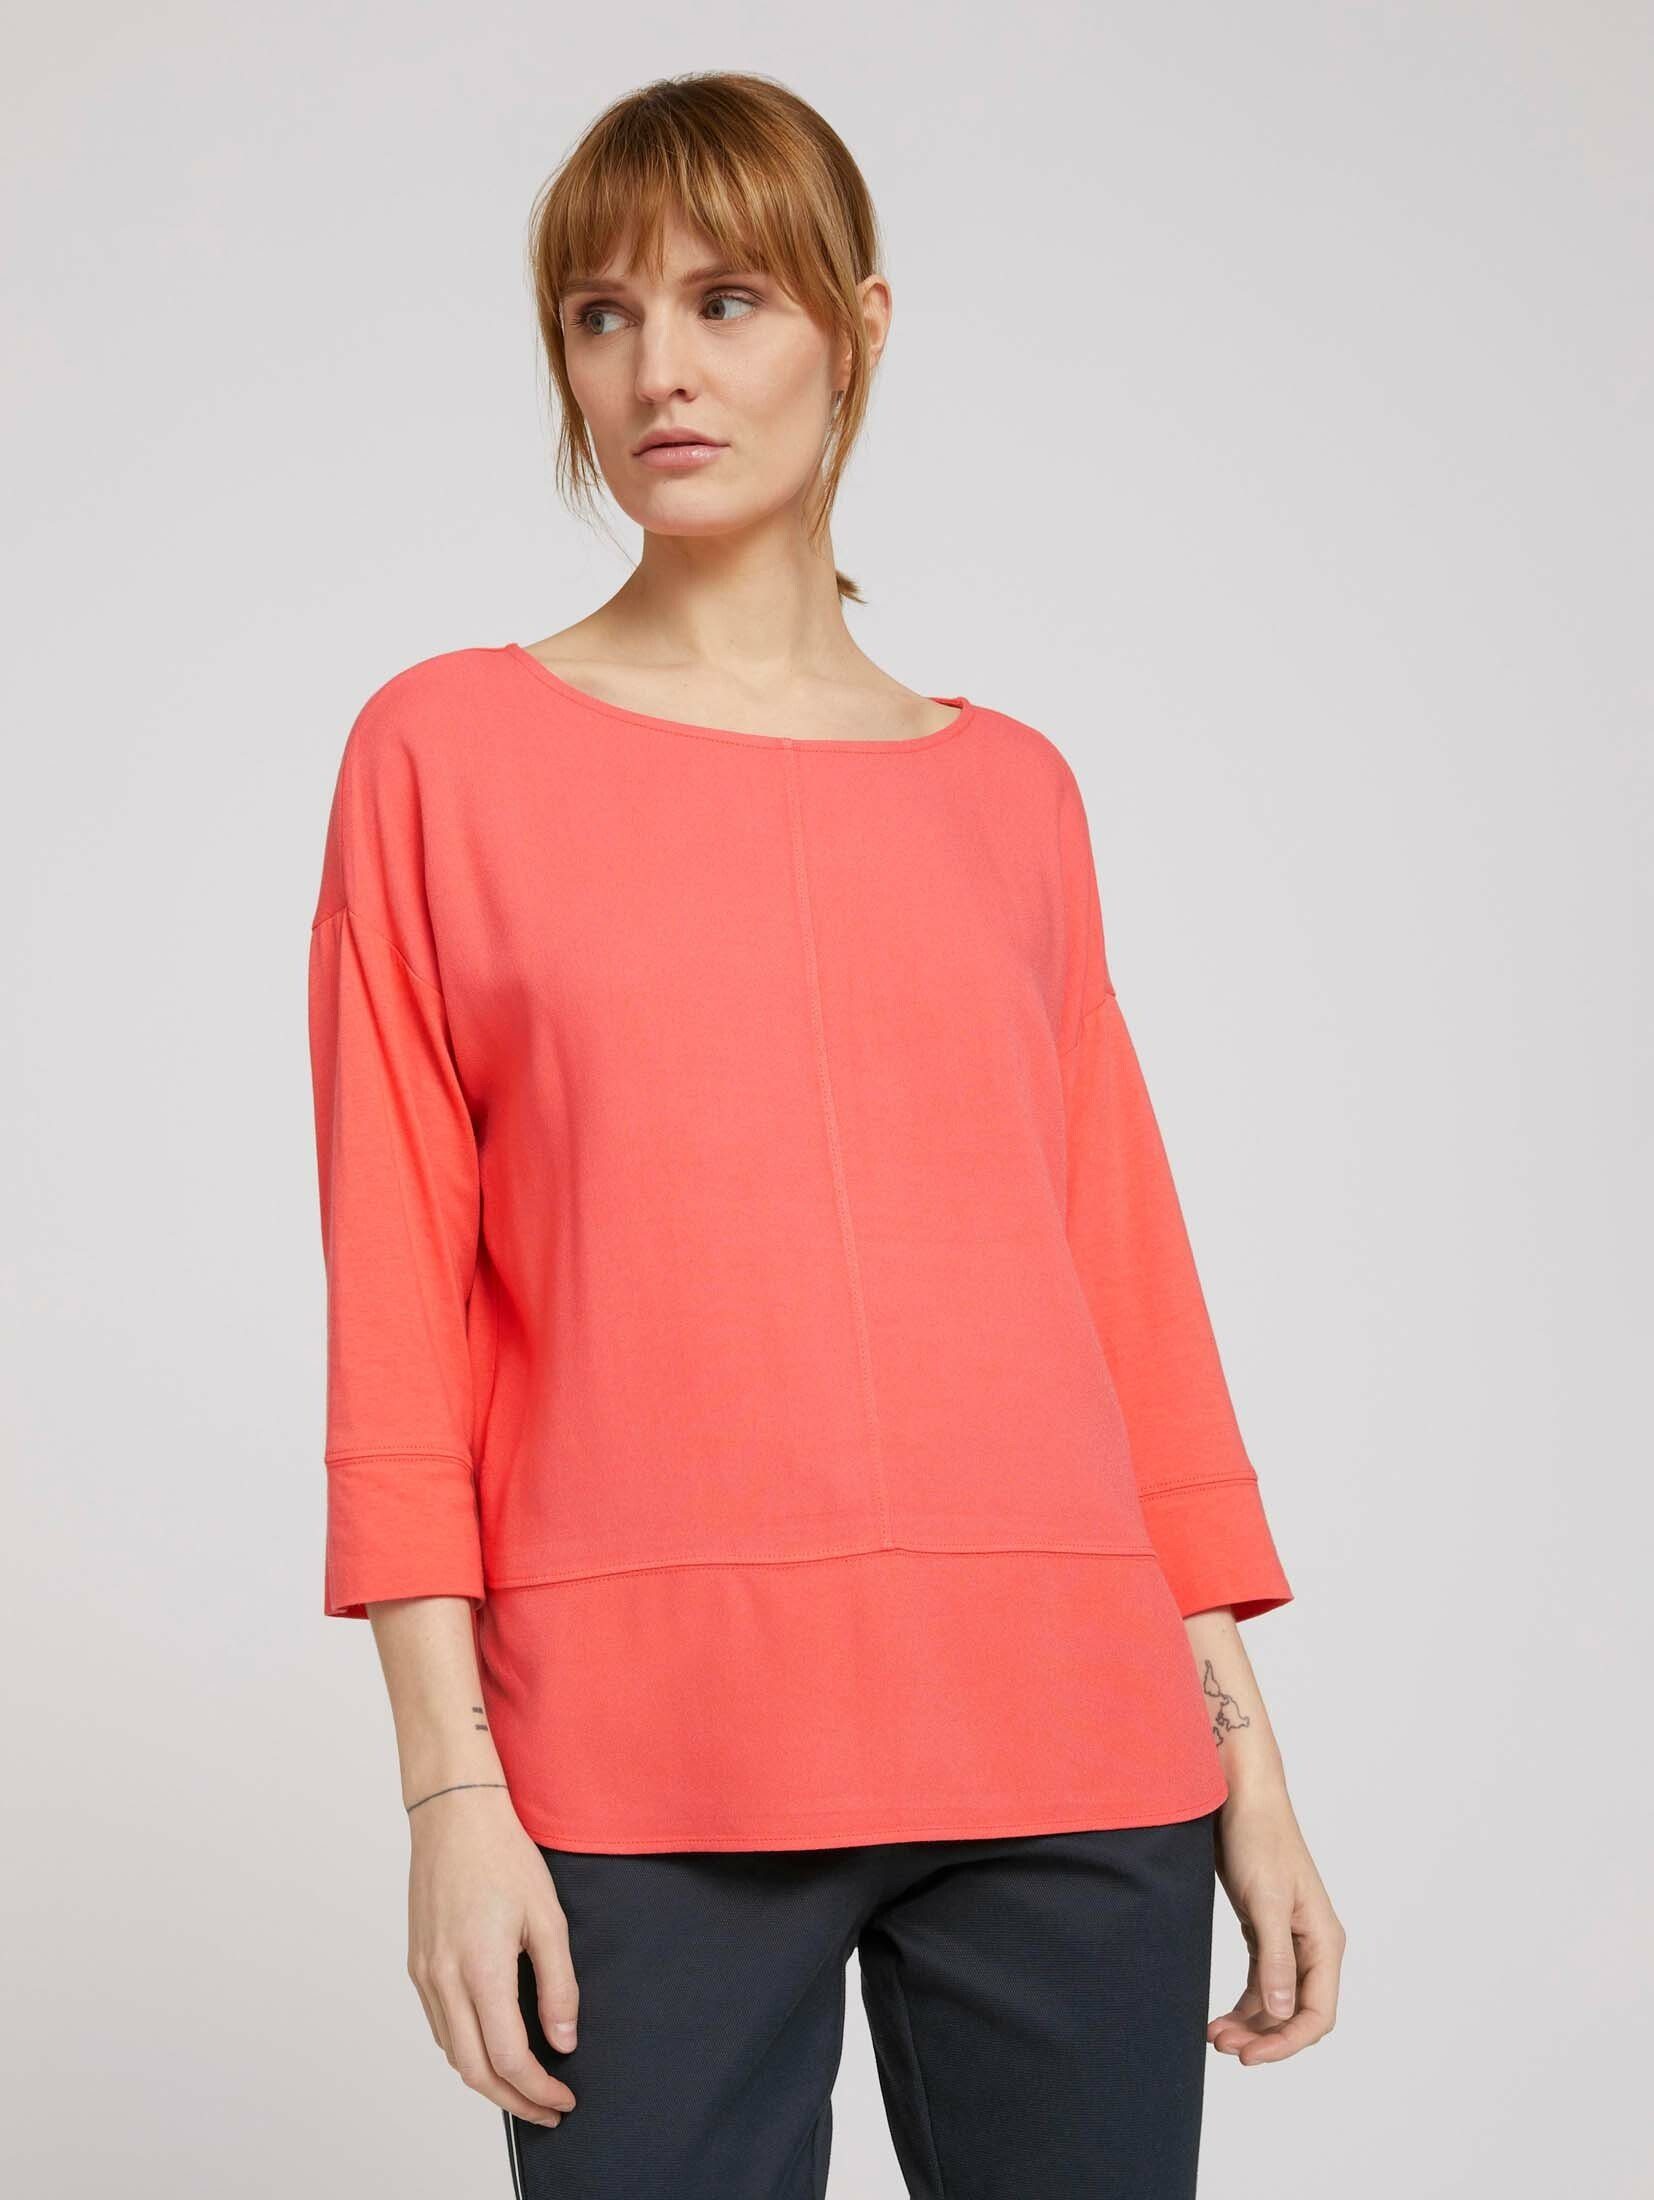 TOM TAILOR T-Shirt Loose Fit Shirt im Materialmix strong peach tone